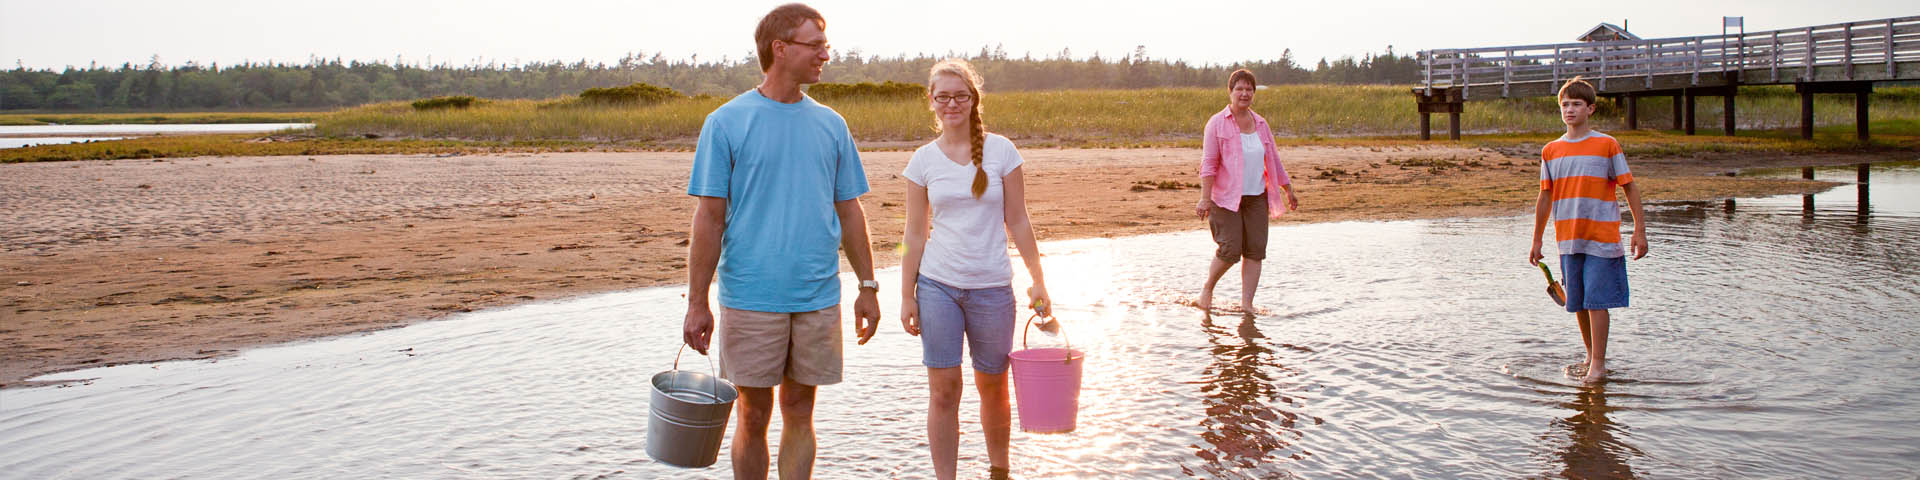 A family walks in the shallow water with scoops and buckets, fishing clams